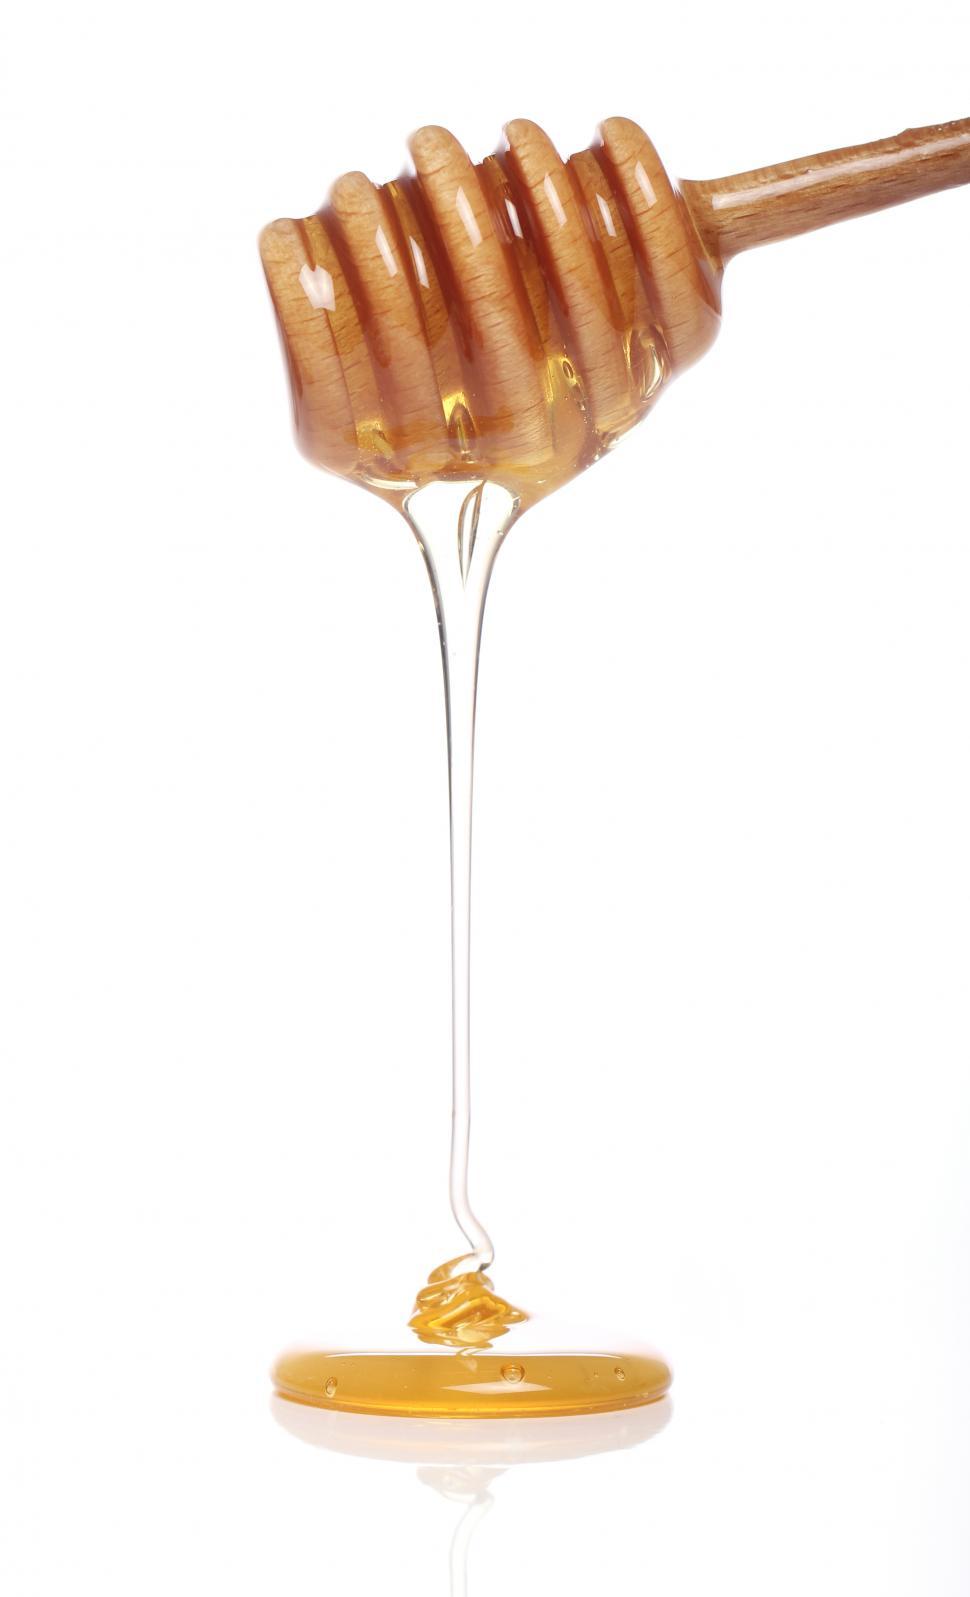 Free Image of Honey dripping from a wooden honey dipper 